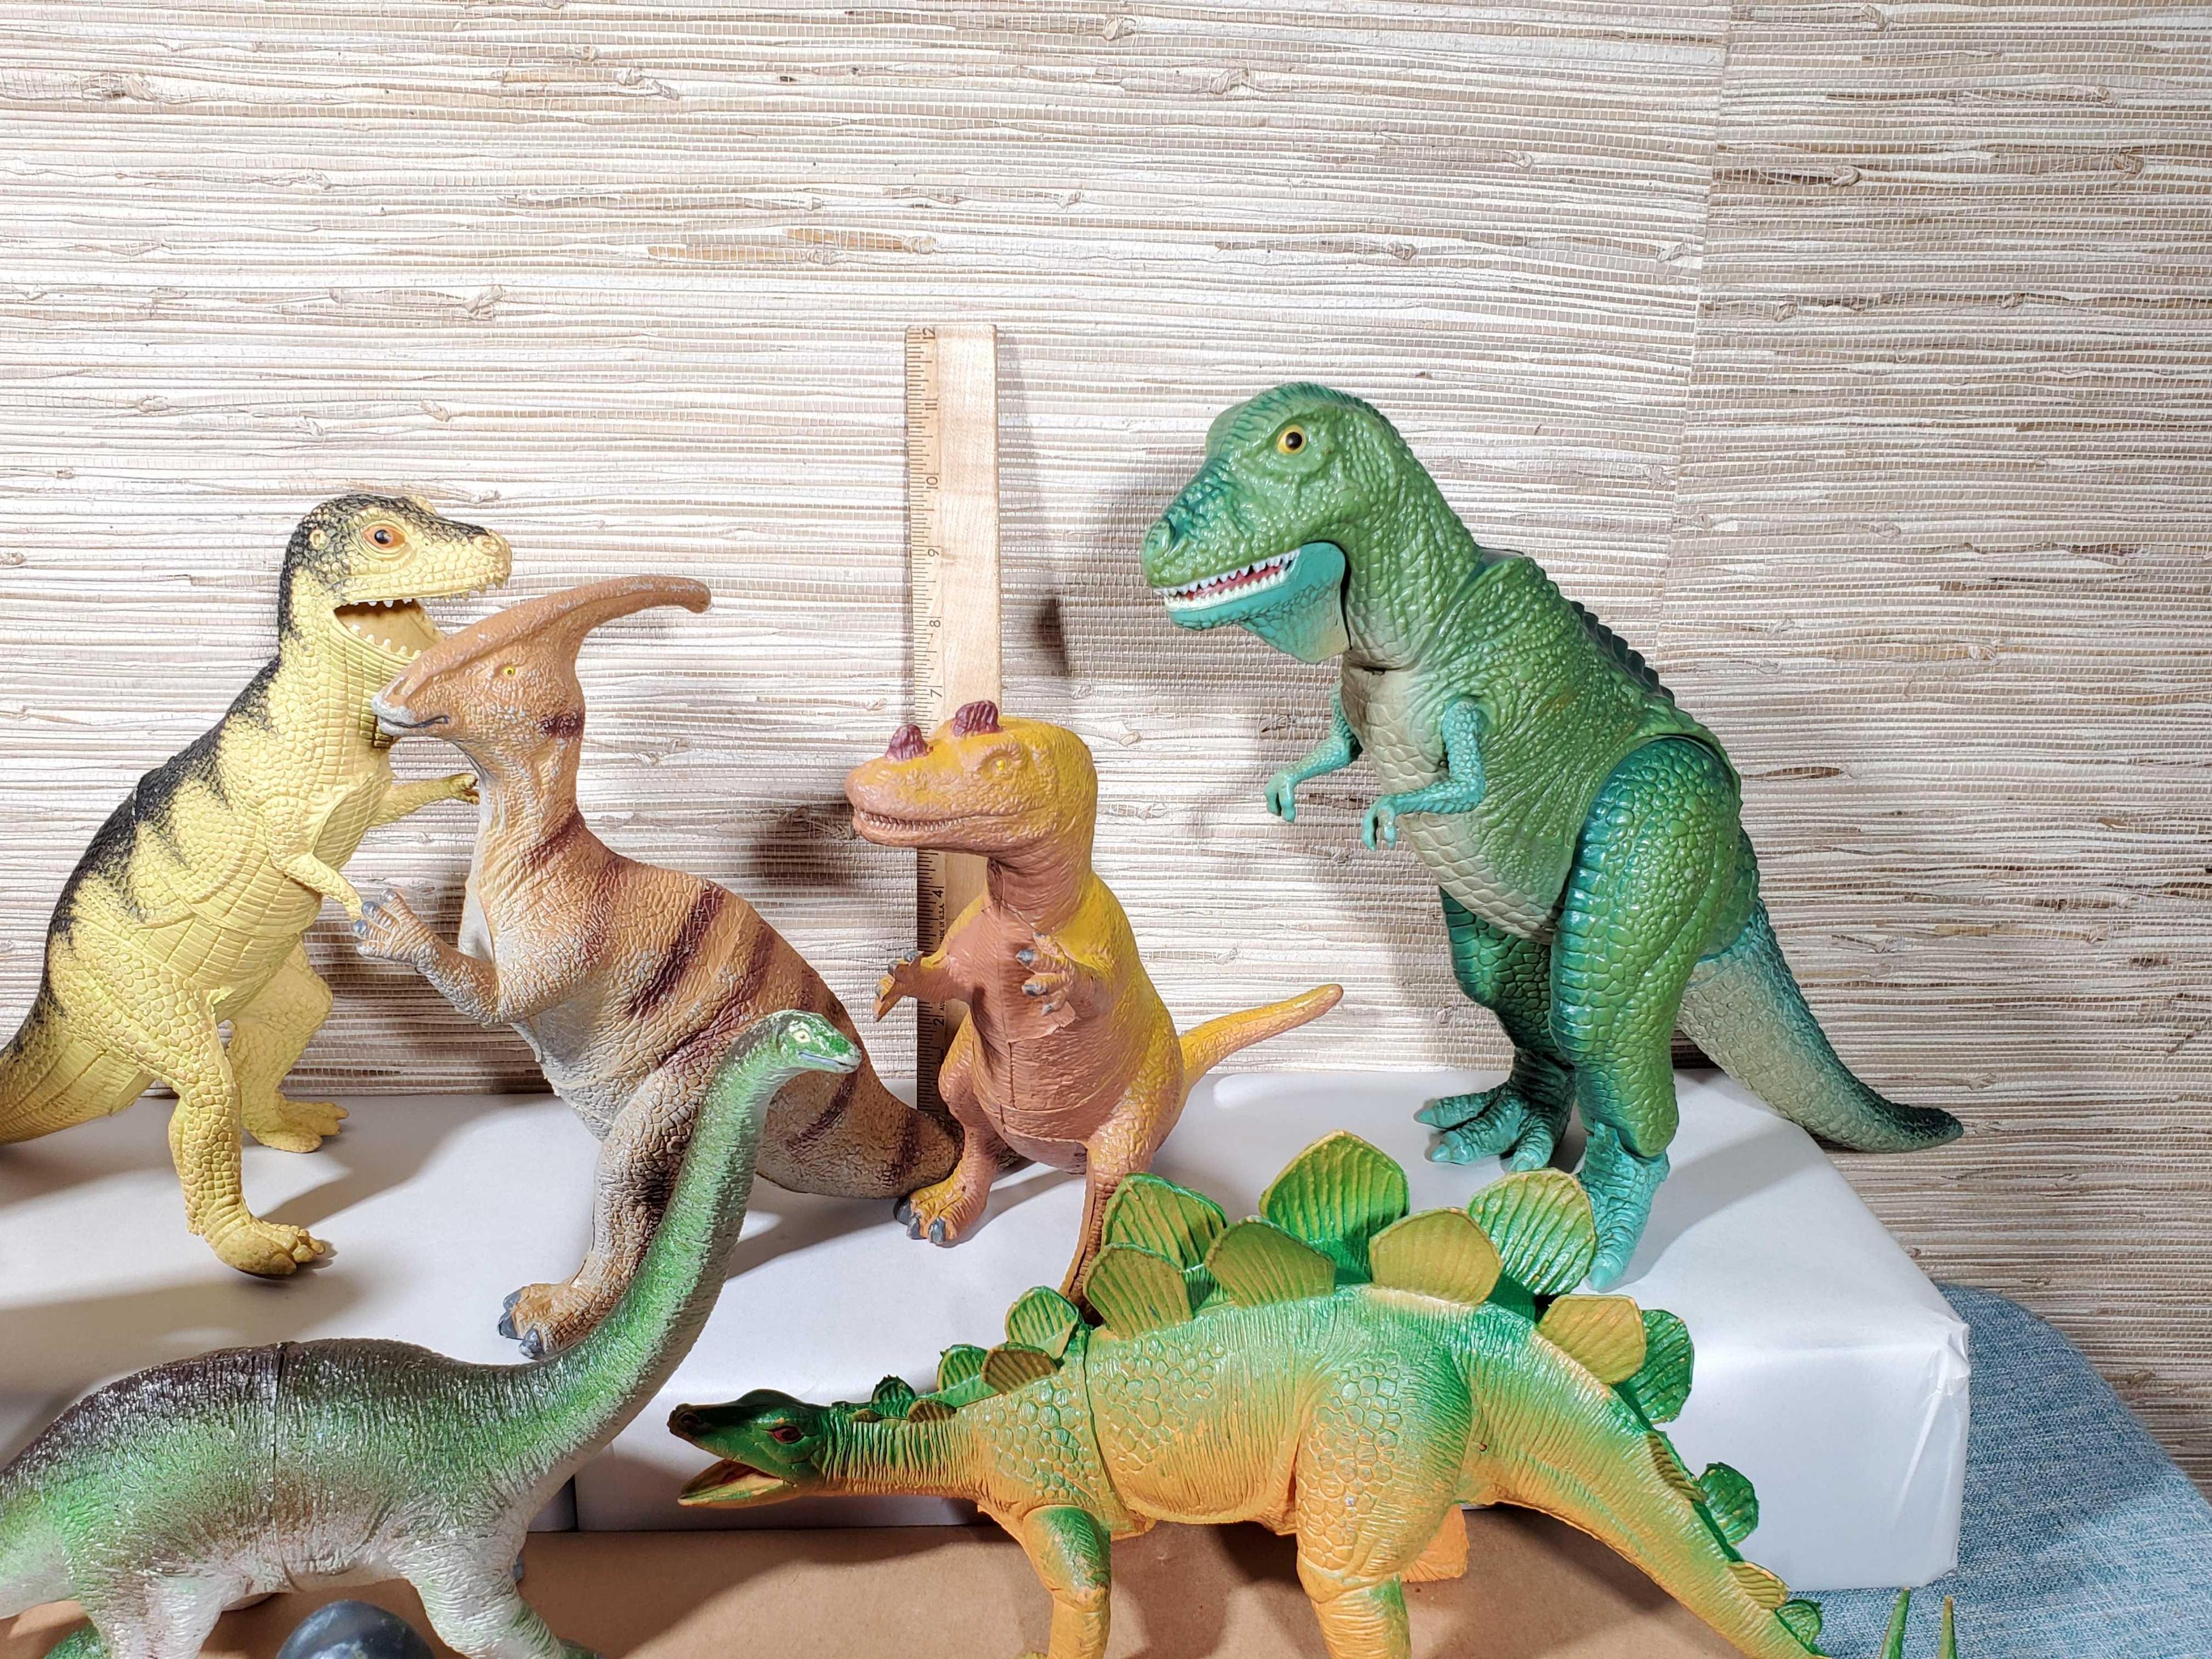 Fun Collection of Realistic Plastic Dinosaurs in a Variety of Sizes